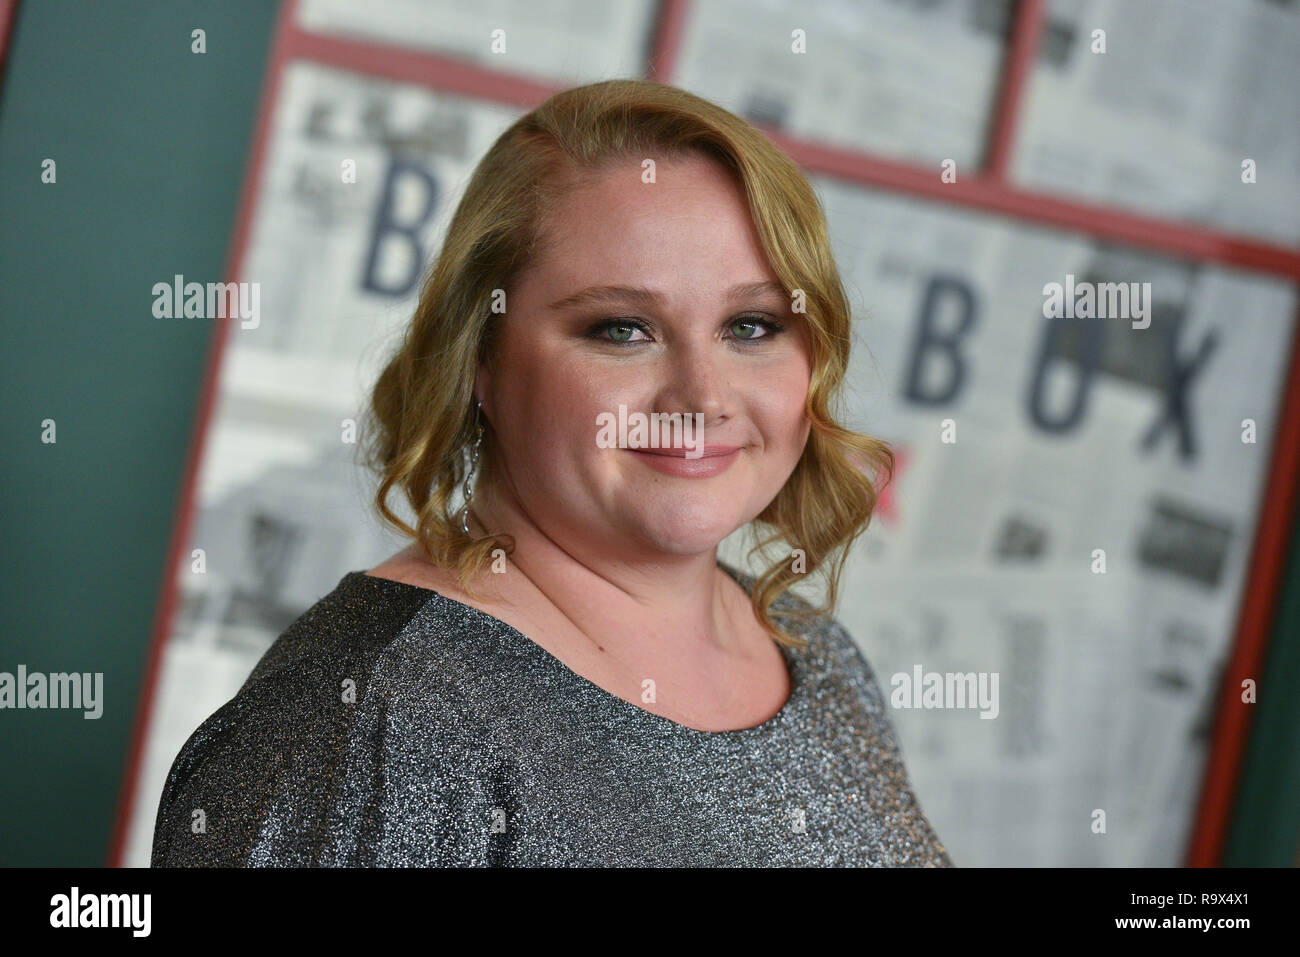 Danielle Macdonald attends the New York screening of 'Bird Box' at Alice Tully Hall, Lincoln Center on December 17, 2018 in New York City. Stock Photo